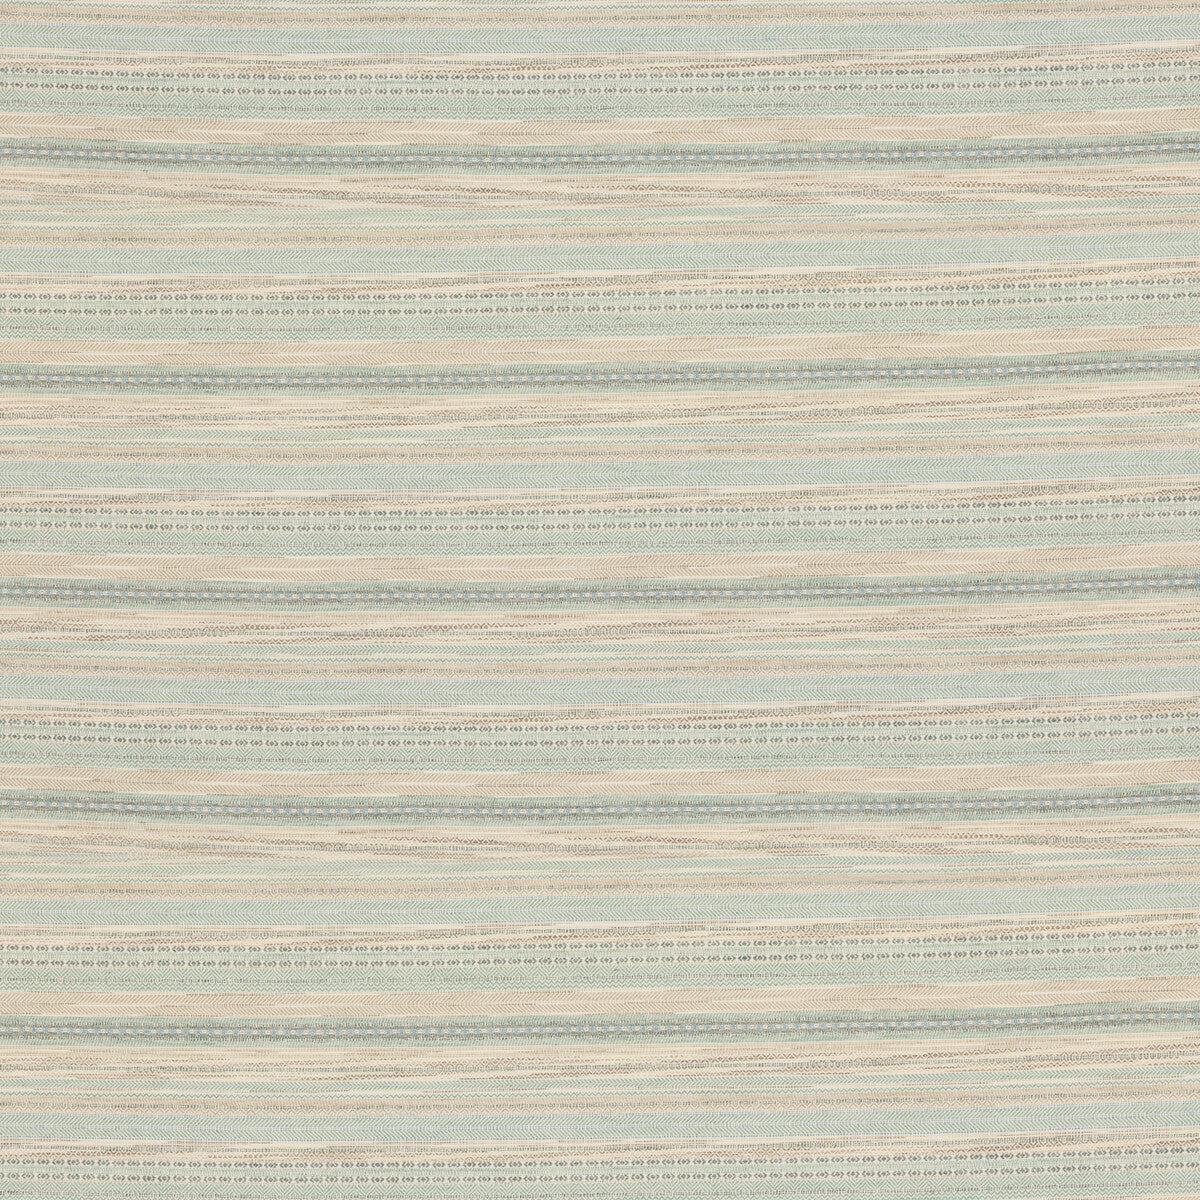 Fairfax fabric in aqua color - pattern BF11036.6.0 - by G P &amp; J Baker in the Burford Weaves collection